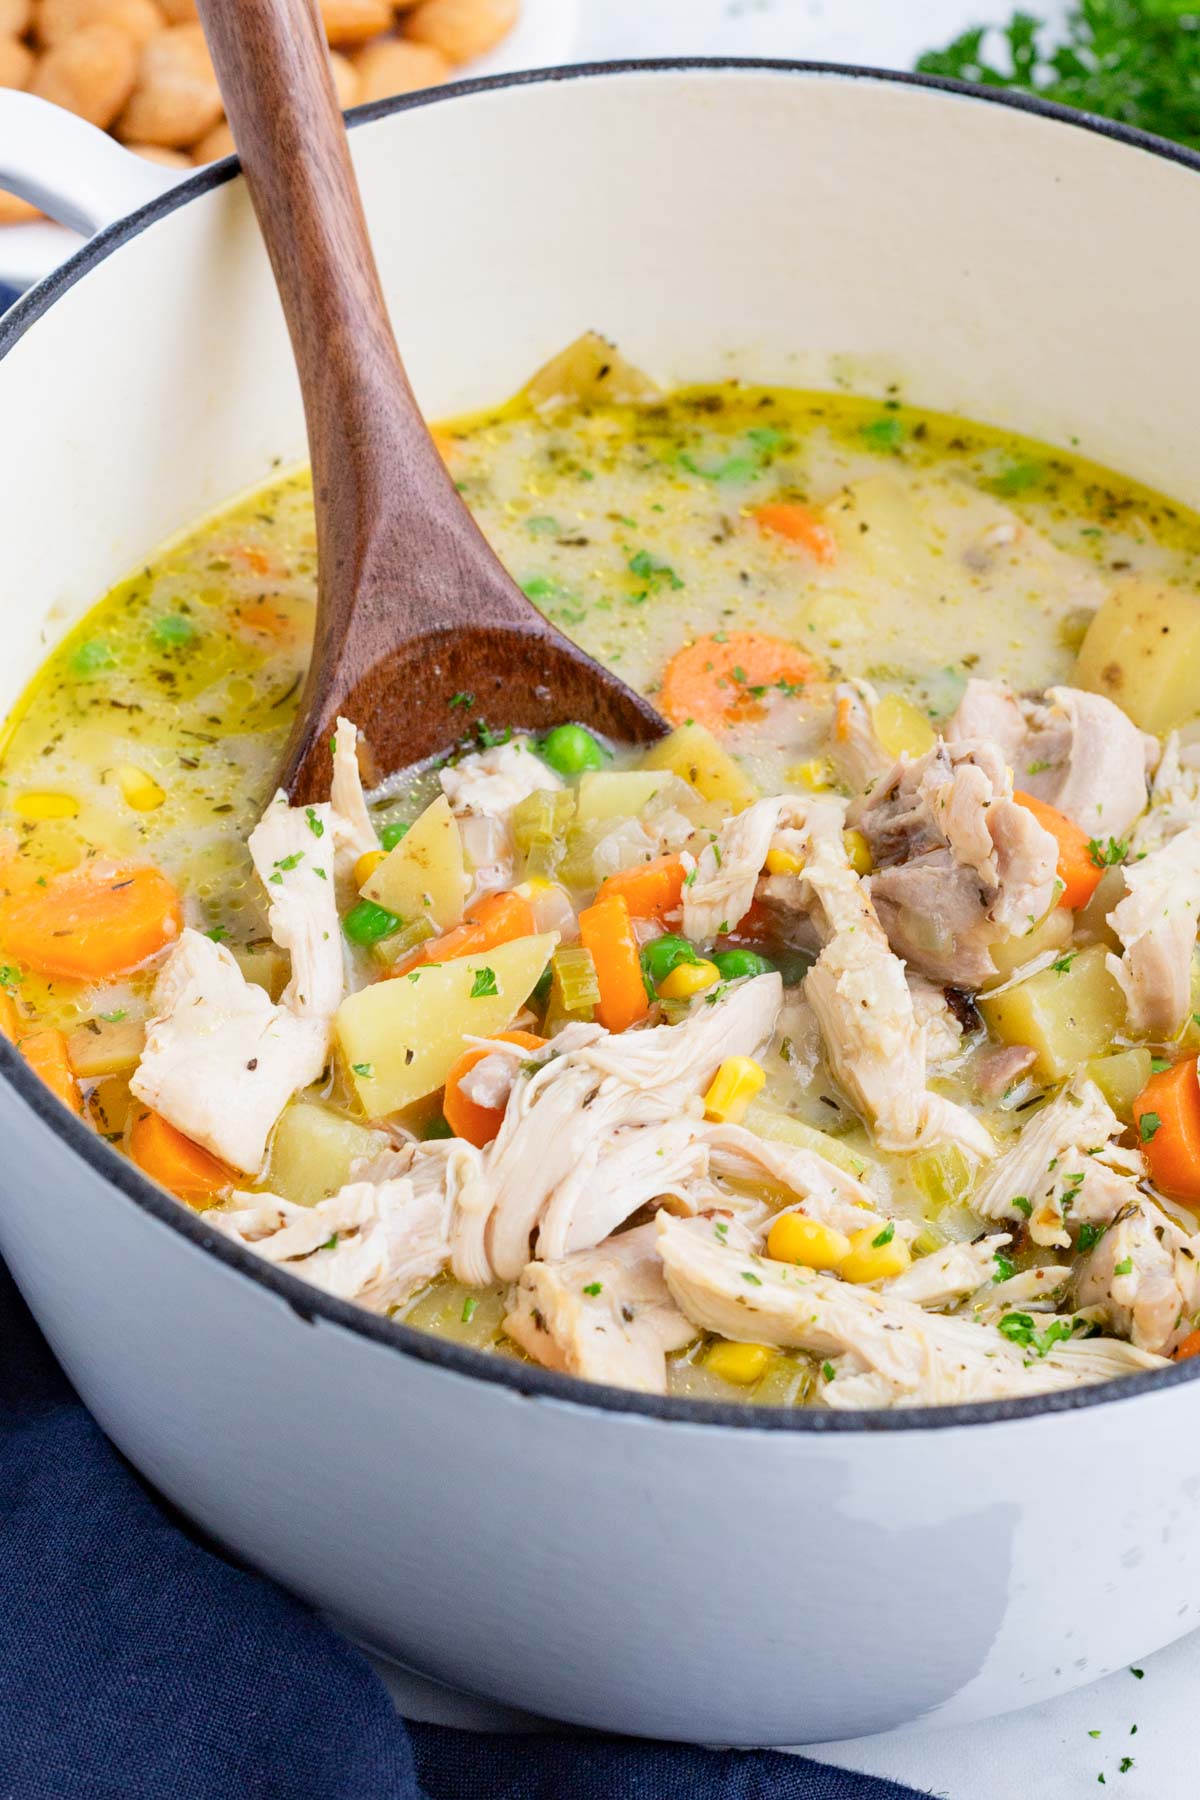 Chicken pot pie soup recipe is in a white Dutch oven with a wooden spoon.